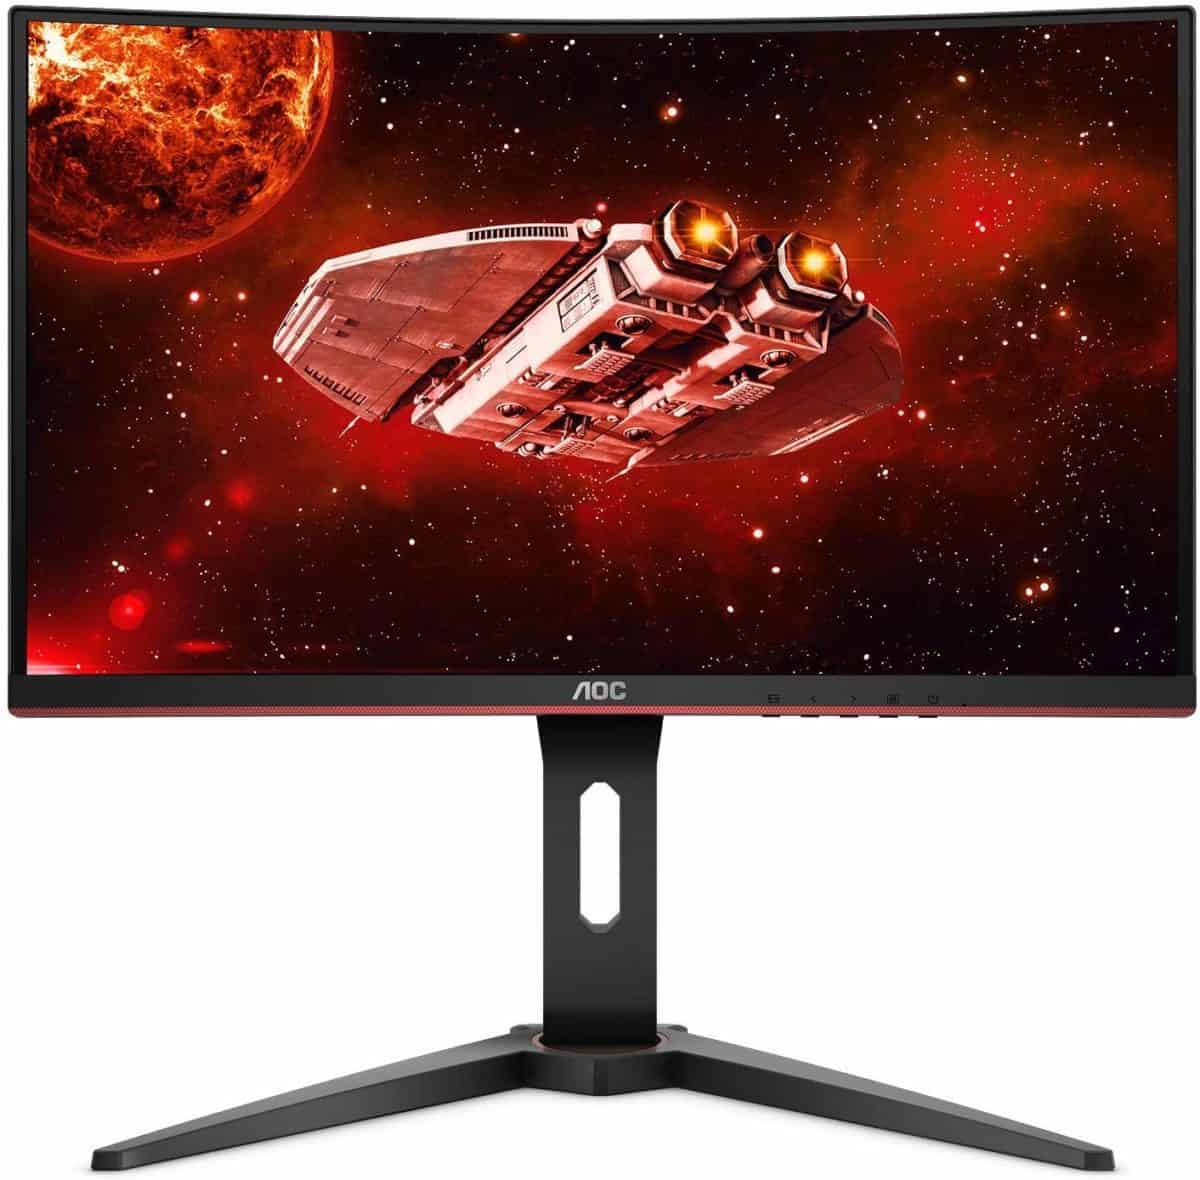 The 5 Best 1440p Monitors (Gaming, 144Hz, Ultrawide)